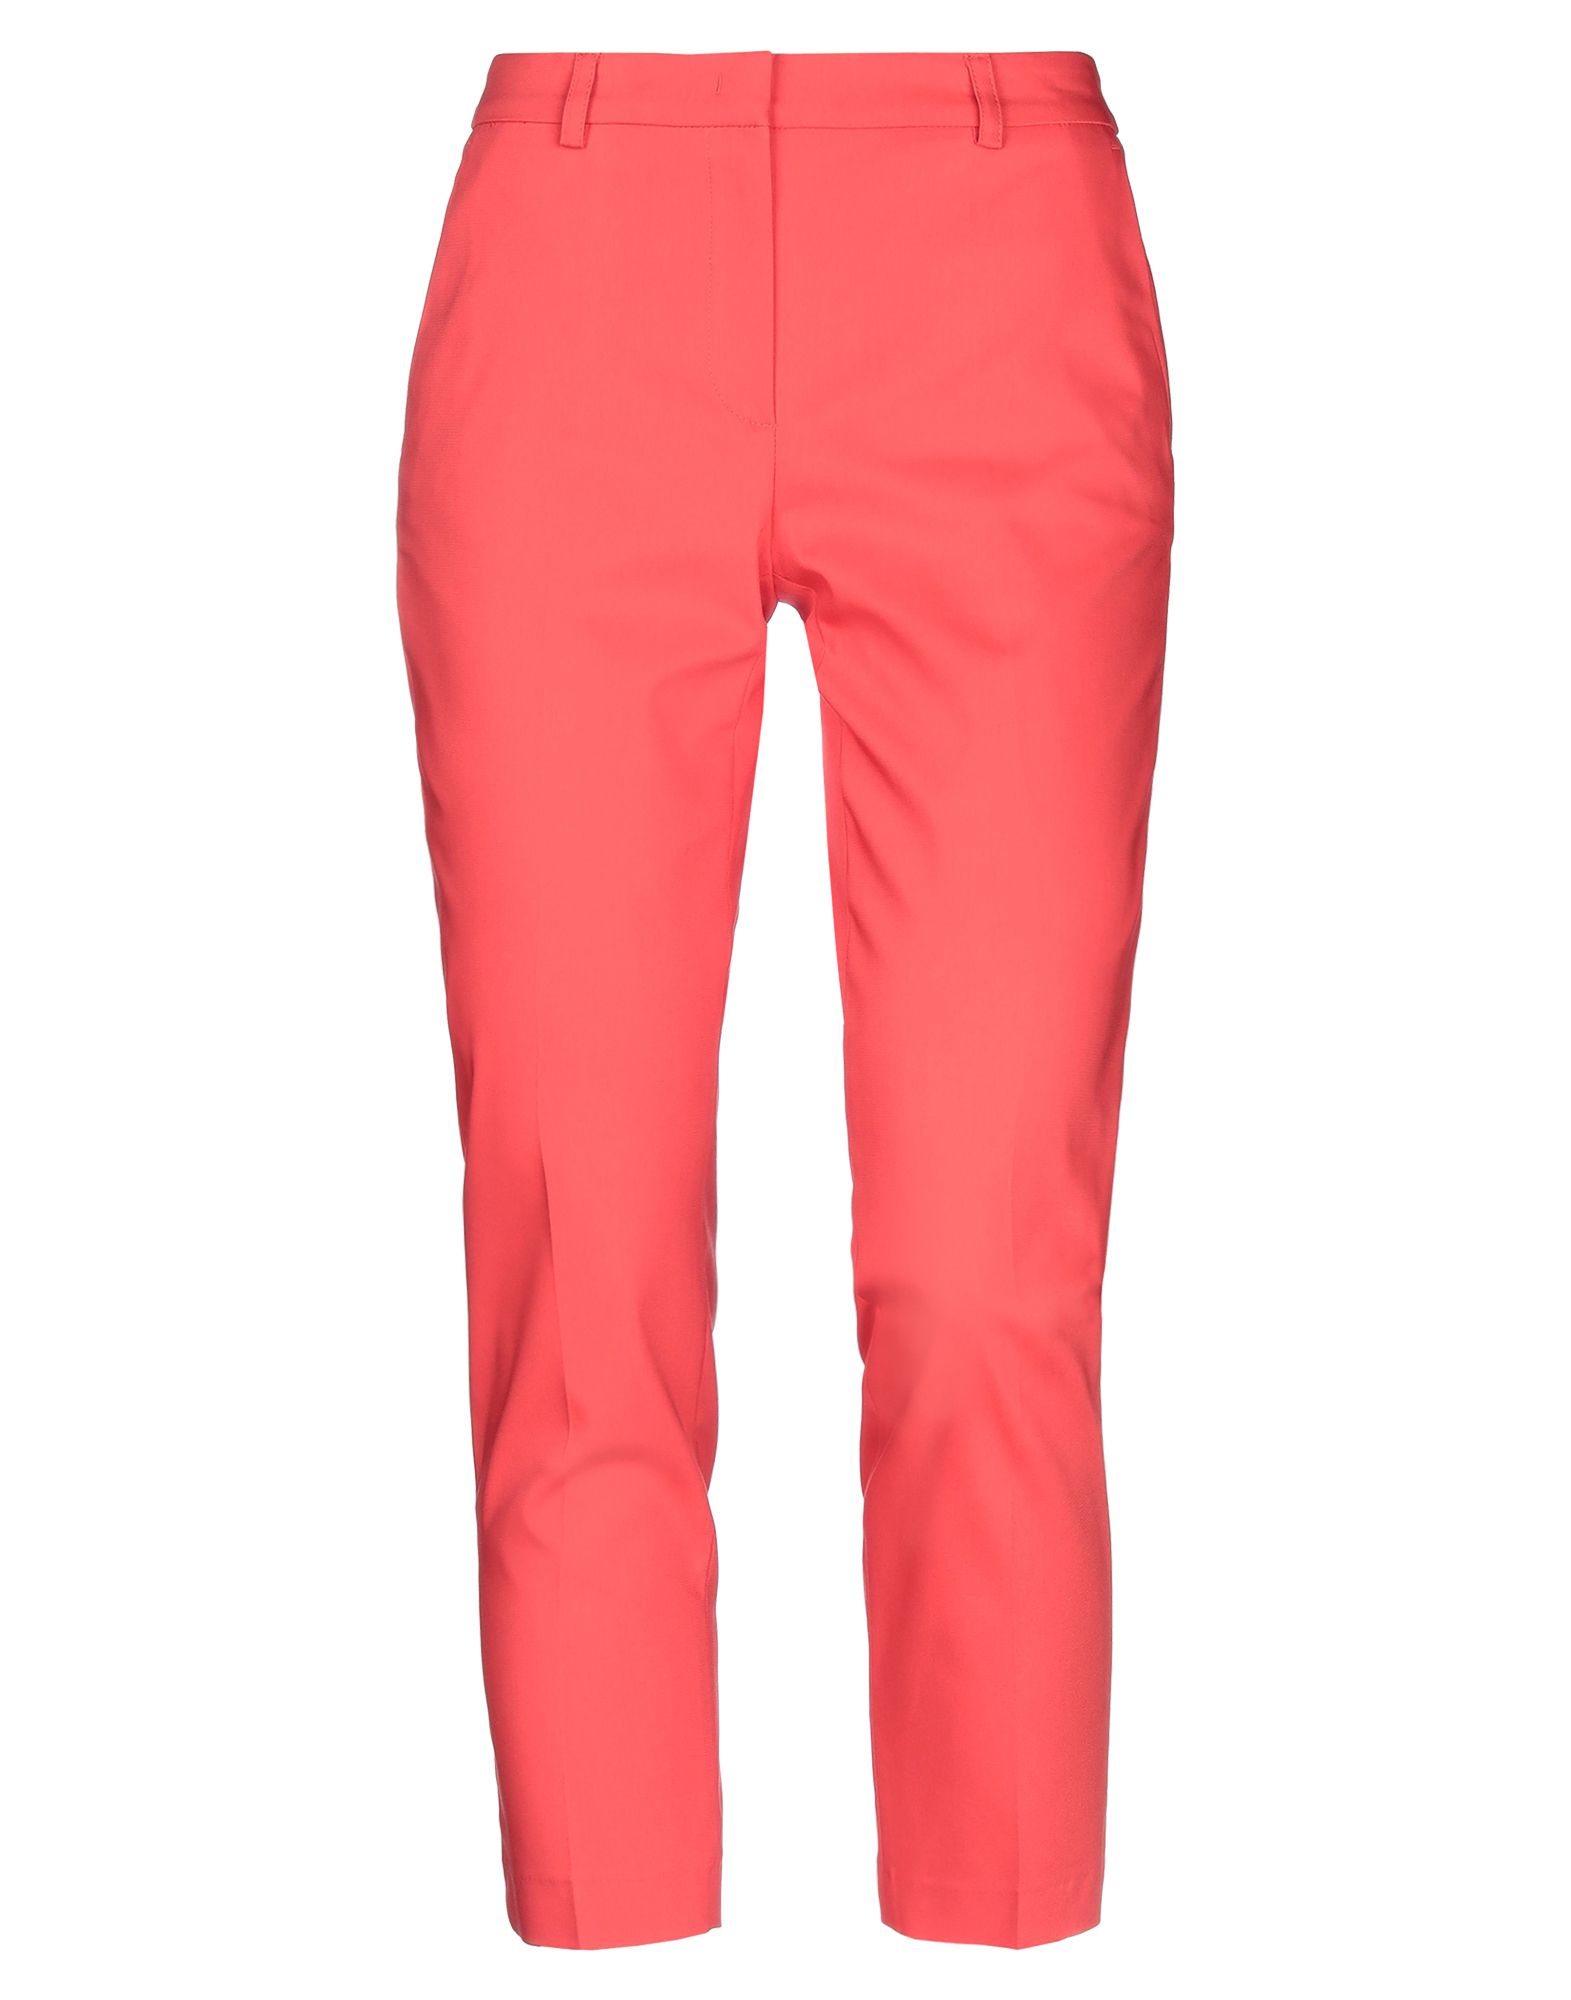 BLANCA BLANCA Casual pants from yoox.com | Daily Mail